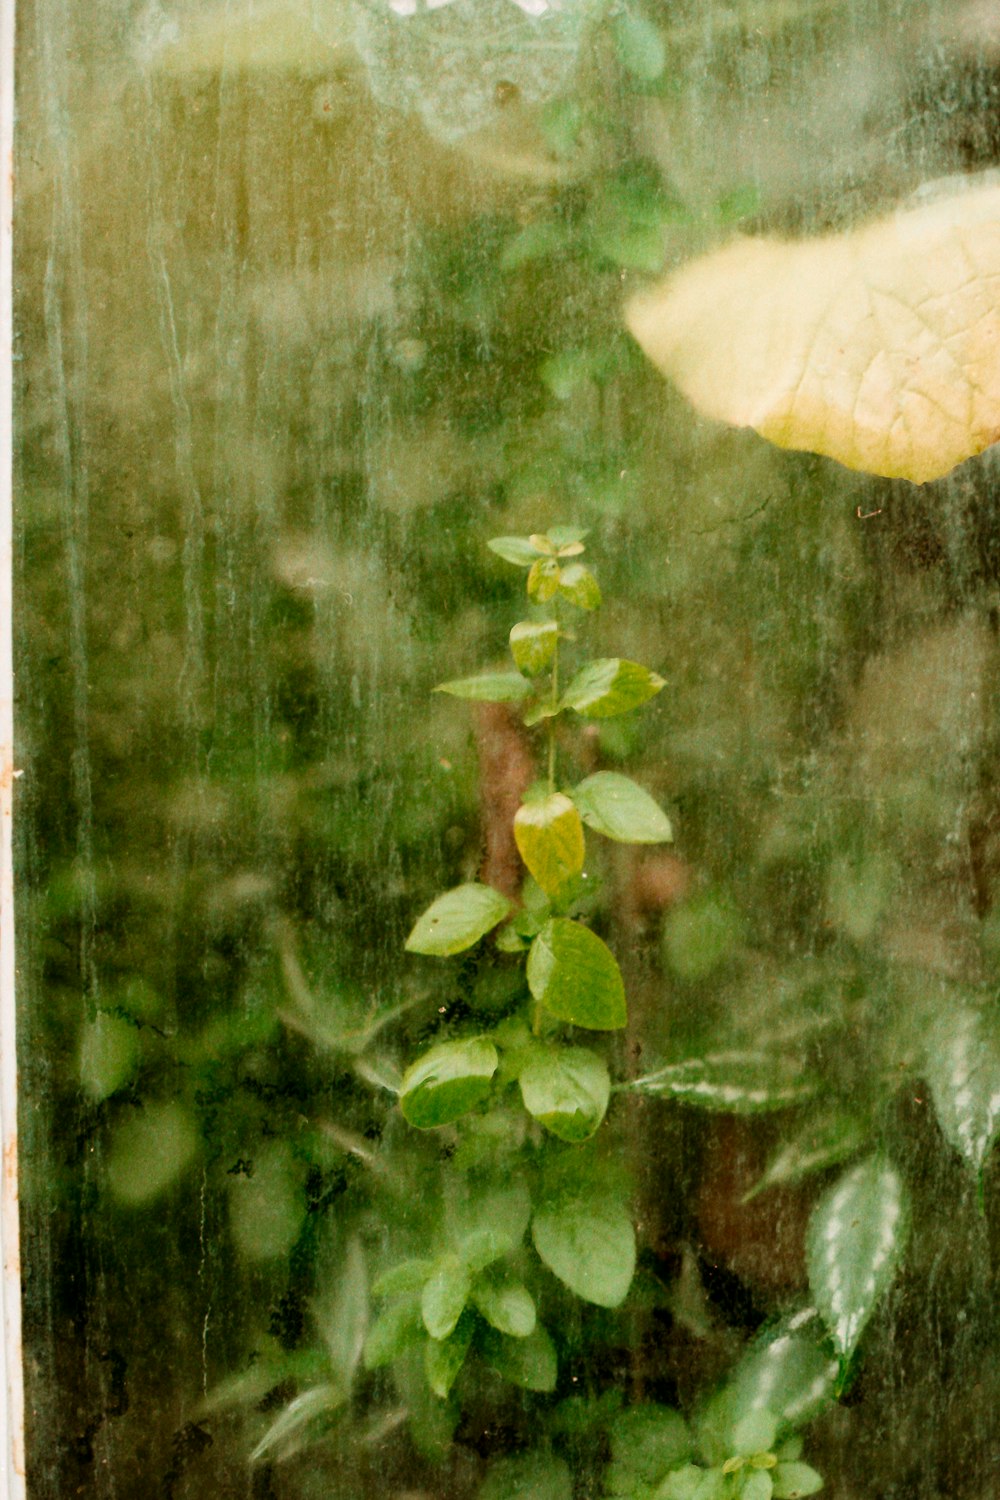 green-leafed plant near clear glass window with water droplets